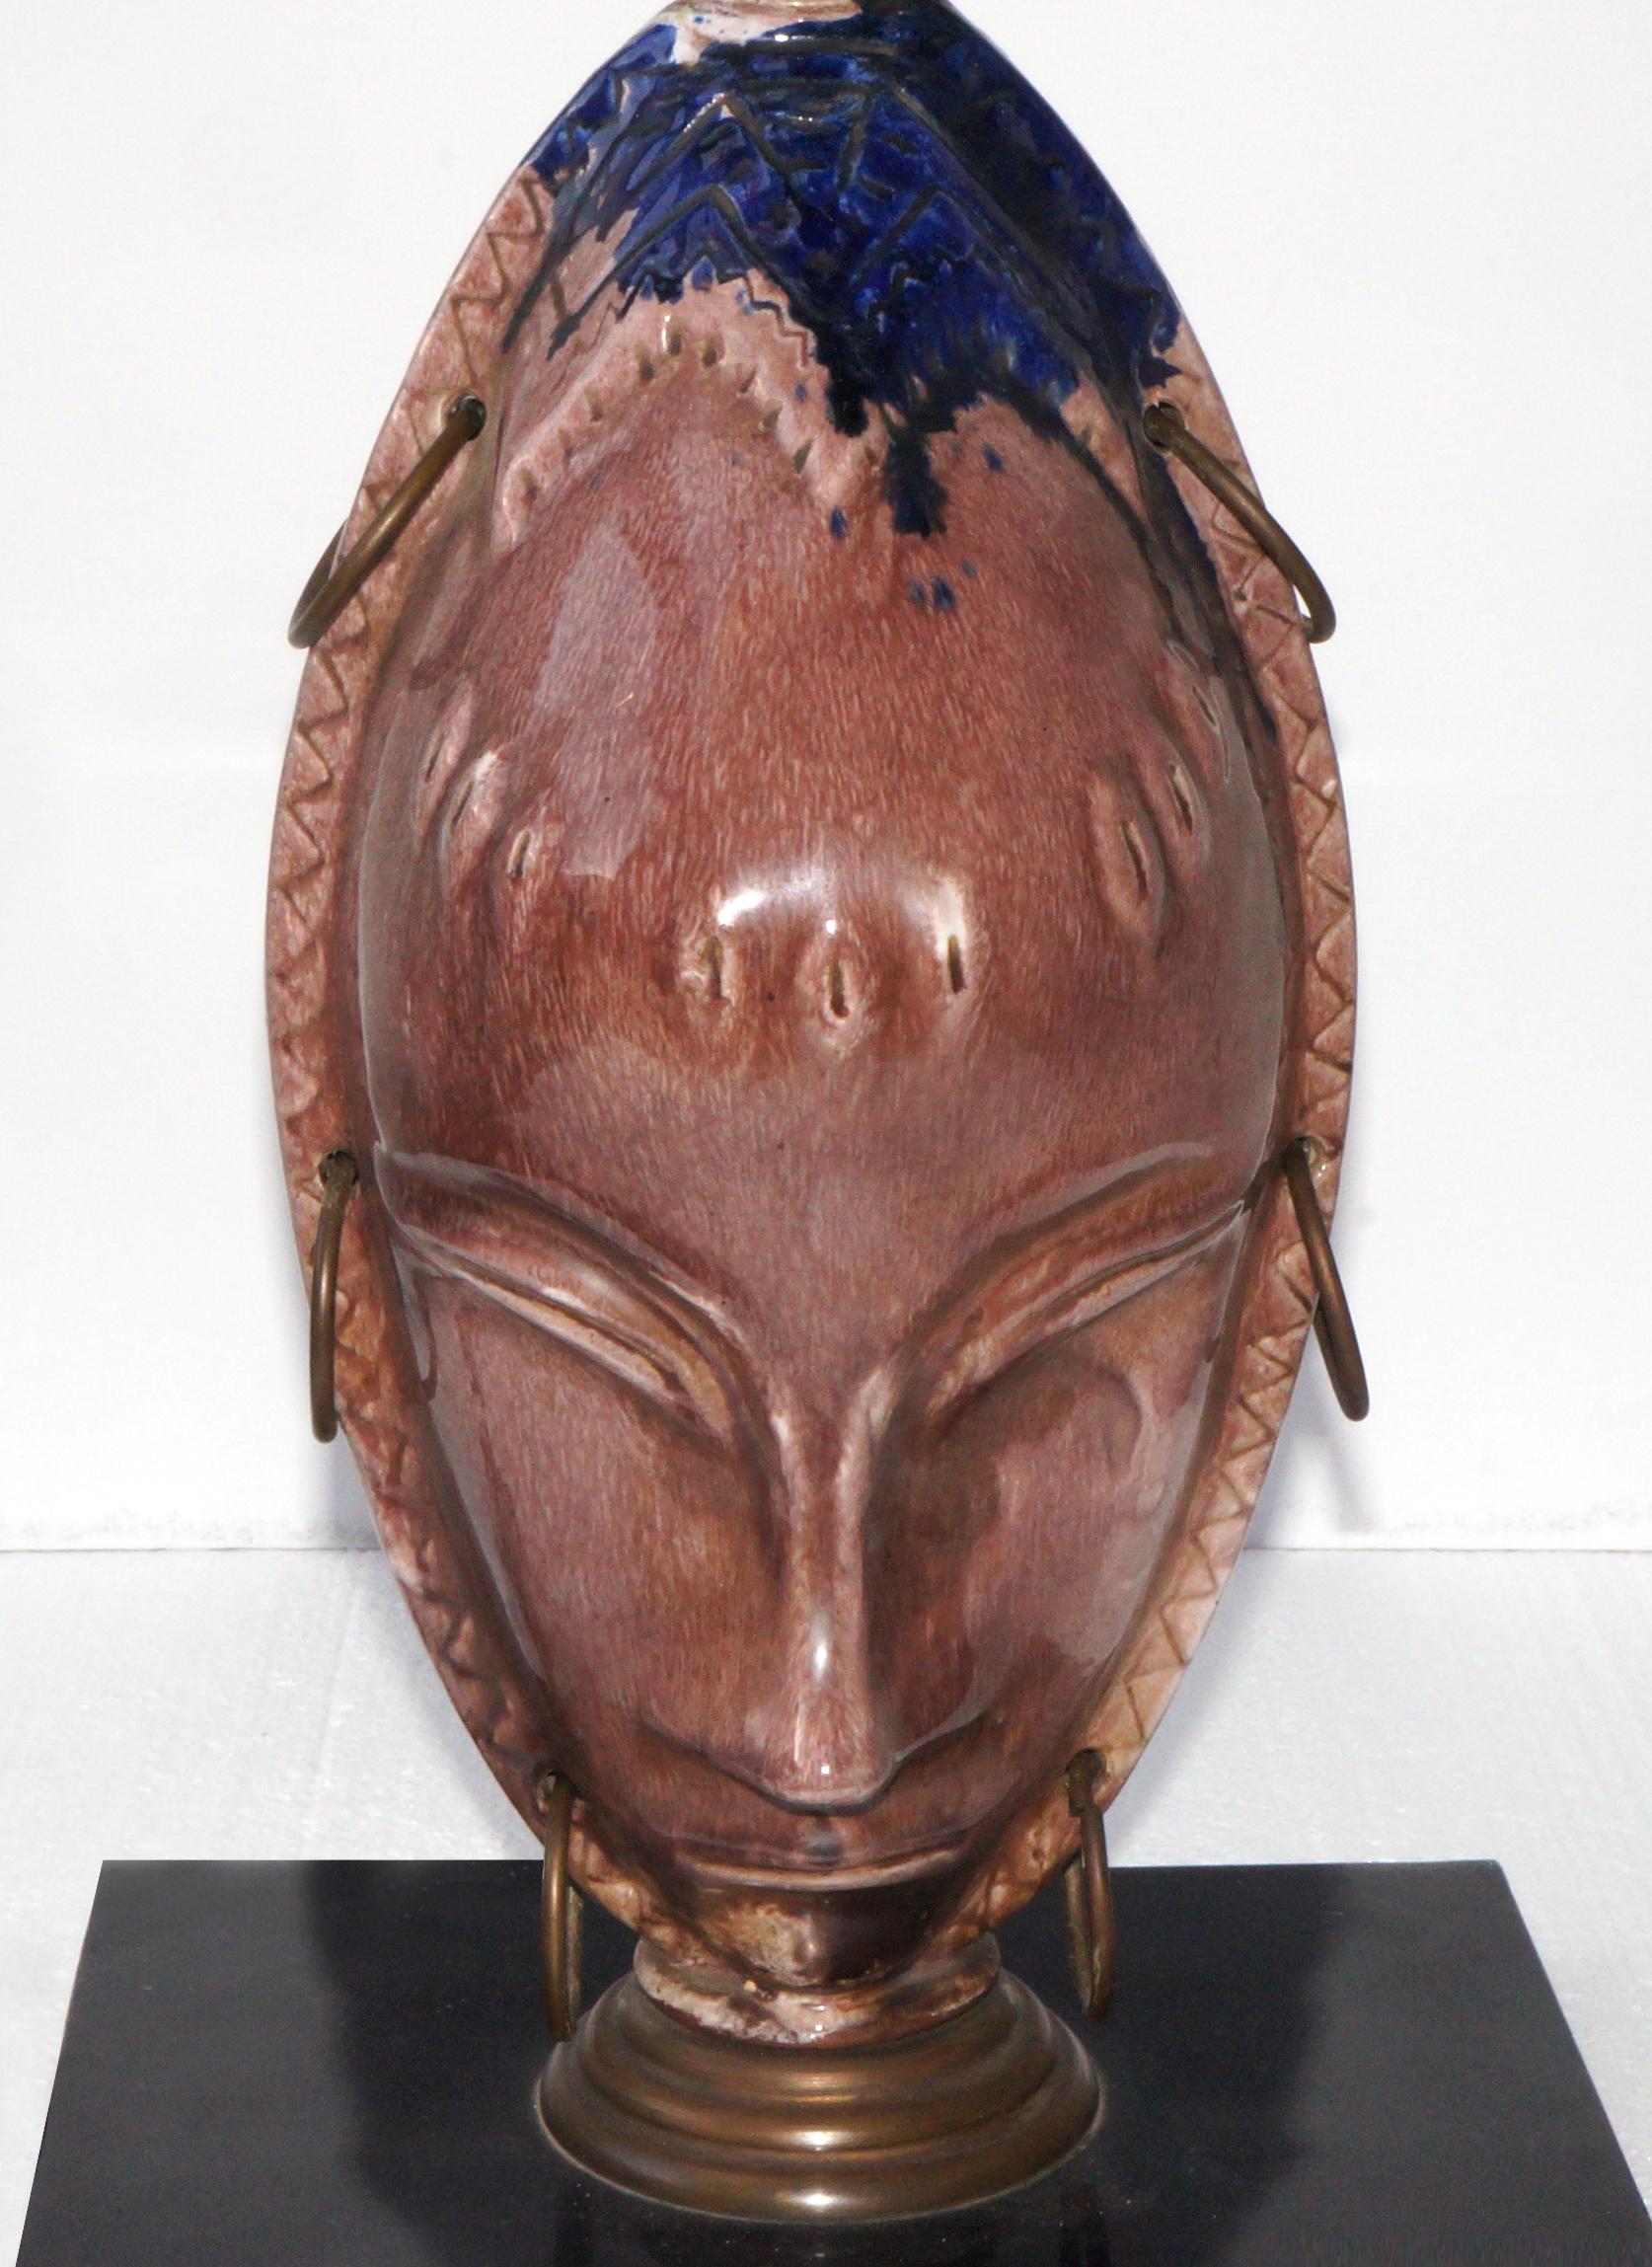 Lamp with the face of an African woman made in high temperature ceramics. They are two faces, one facing the front and one on the back creating an incredible optical illusion. Mounted on a lacquered iron base, with bronze details. Shade not included.